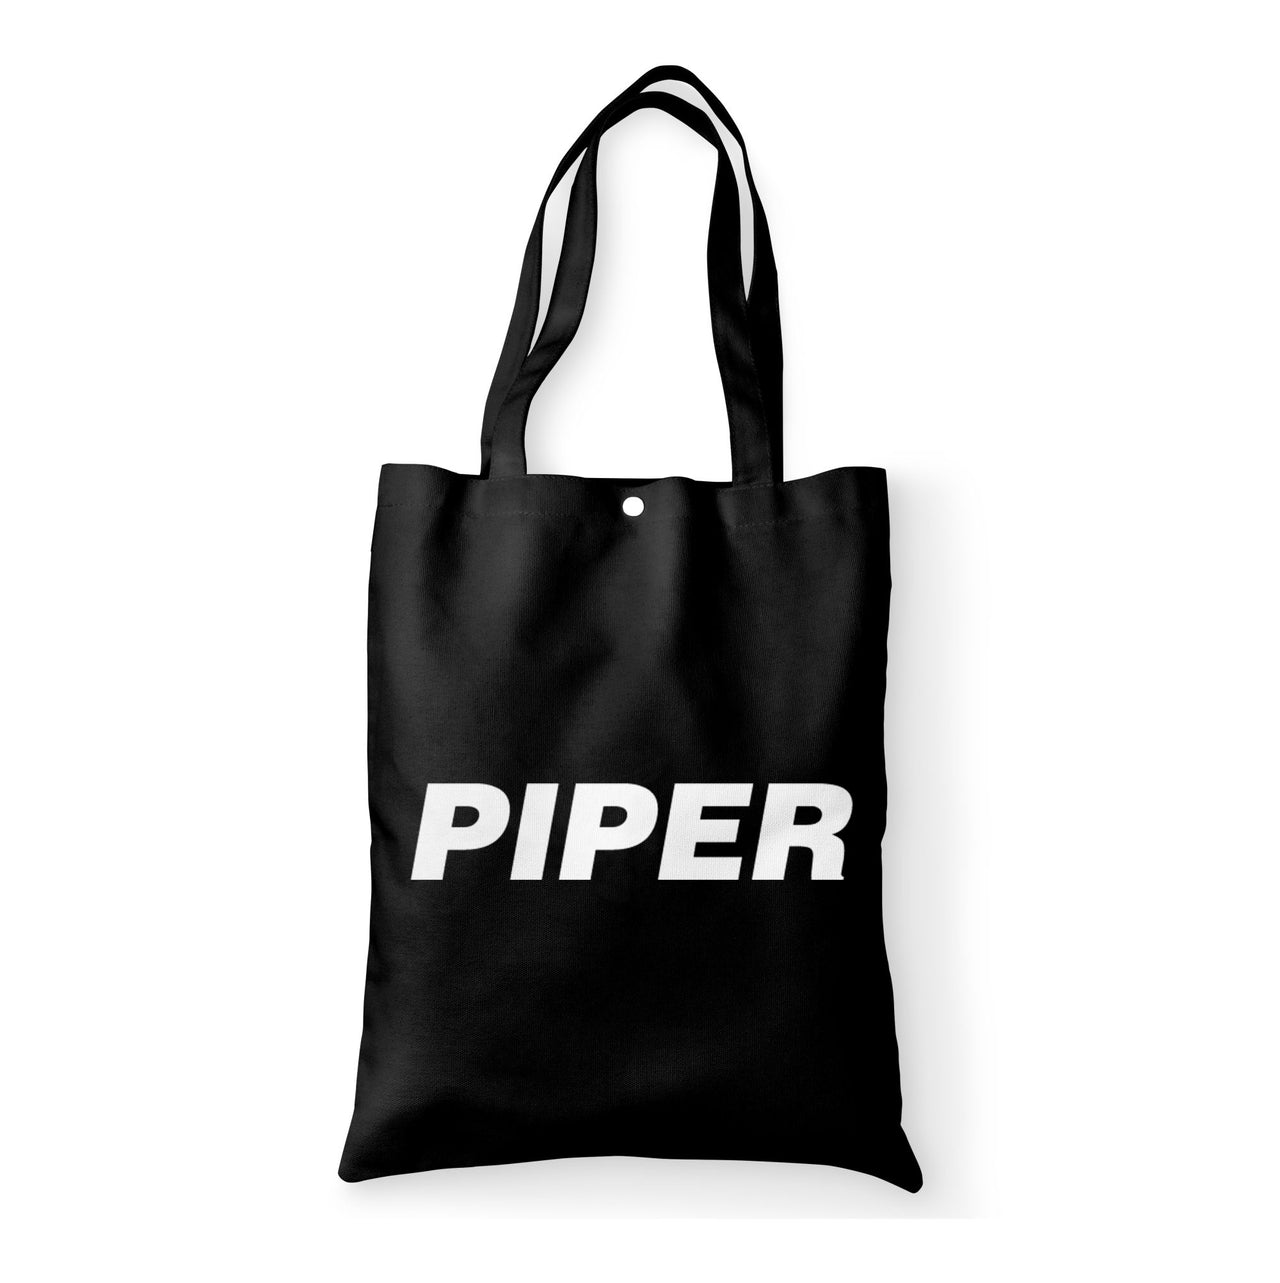 Piper & Text Designed Tote Bags